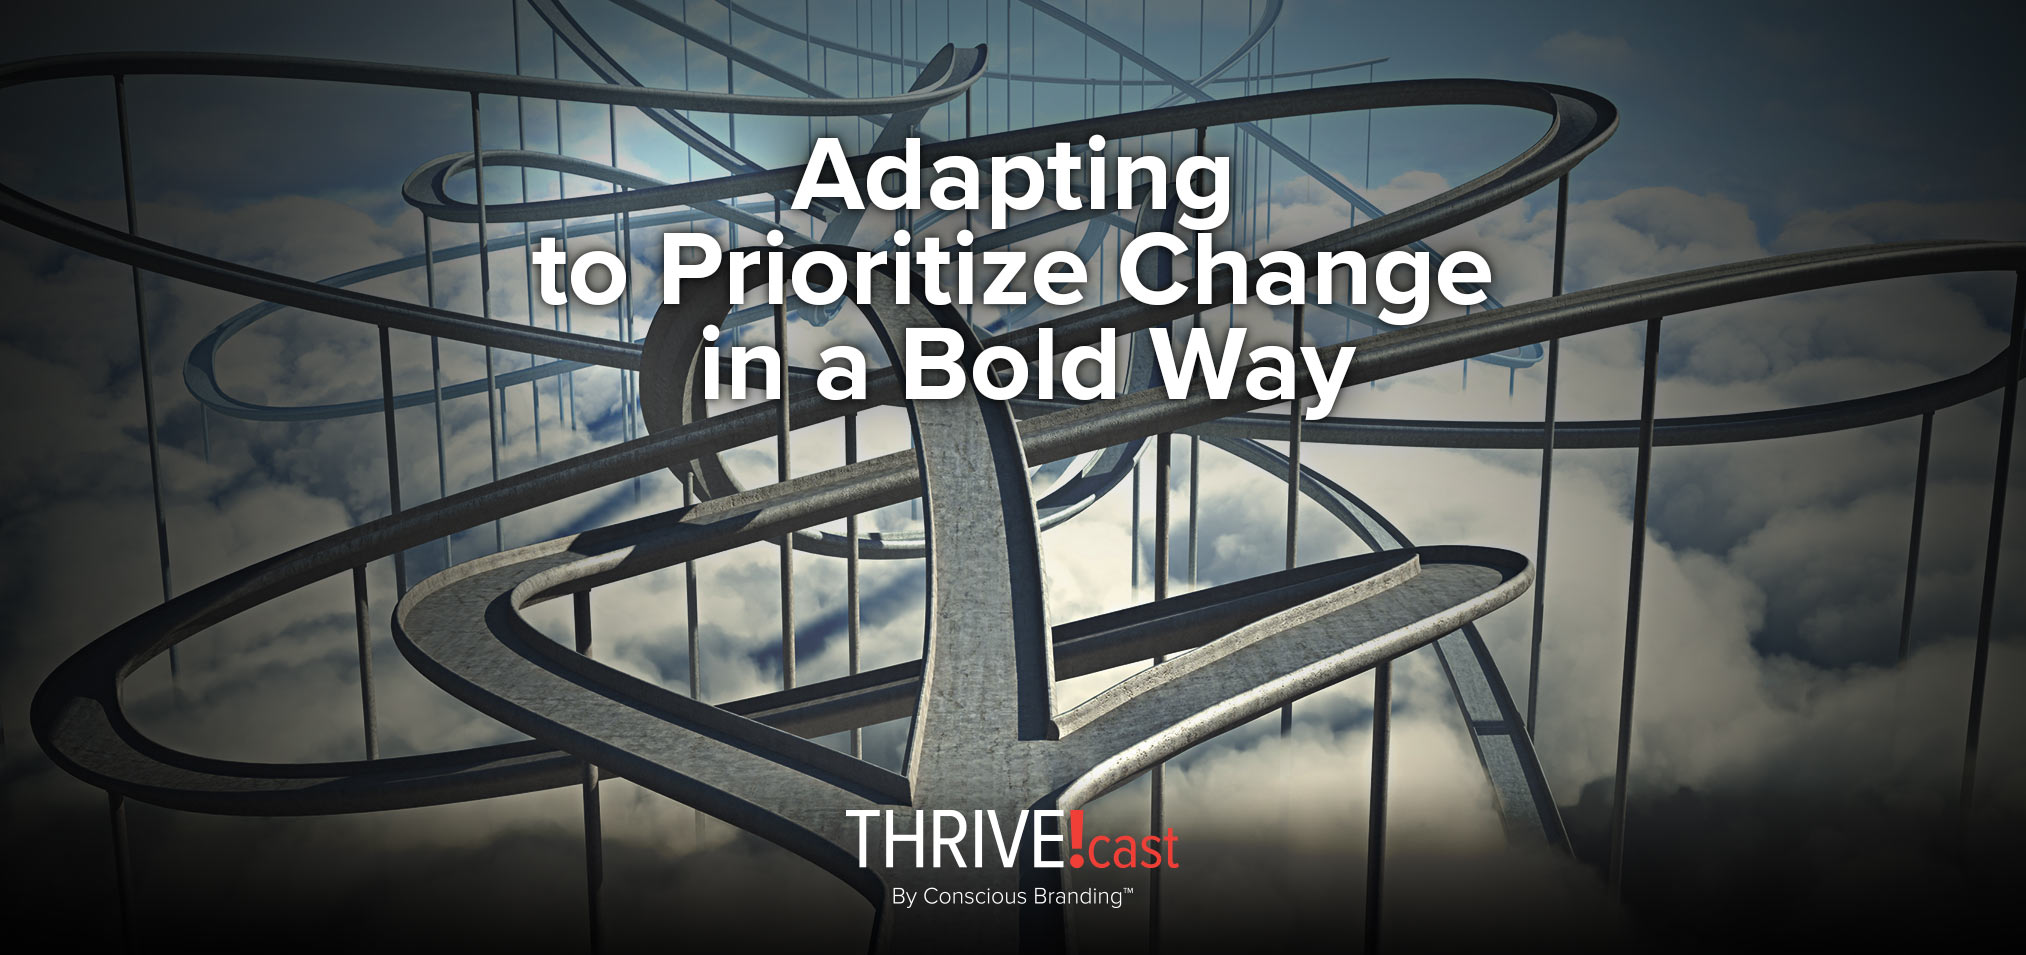 Thrivecast - Adapting to Prioritize Change in a Bold Way